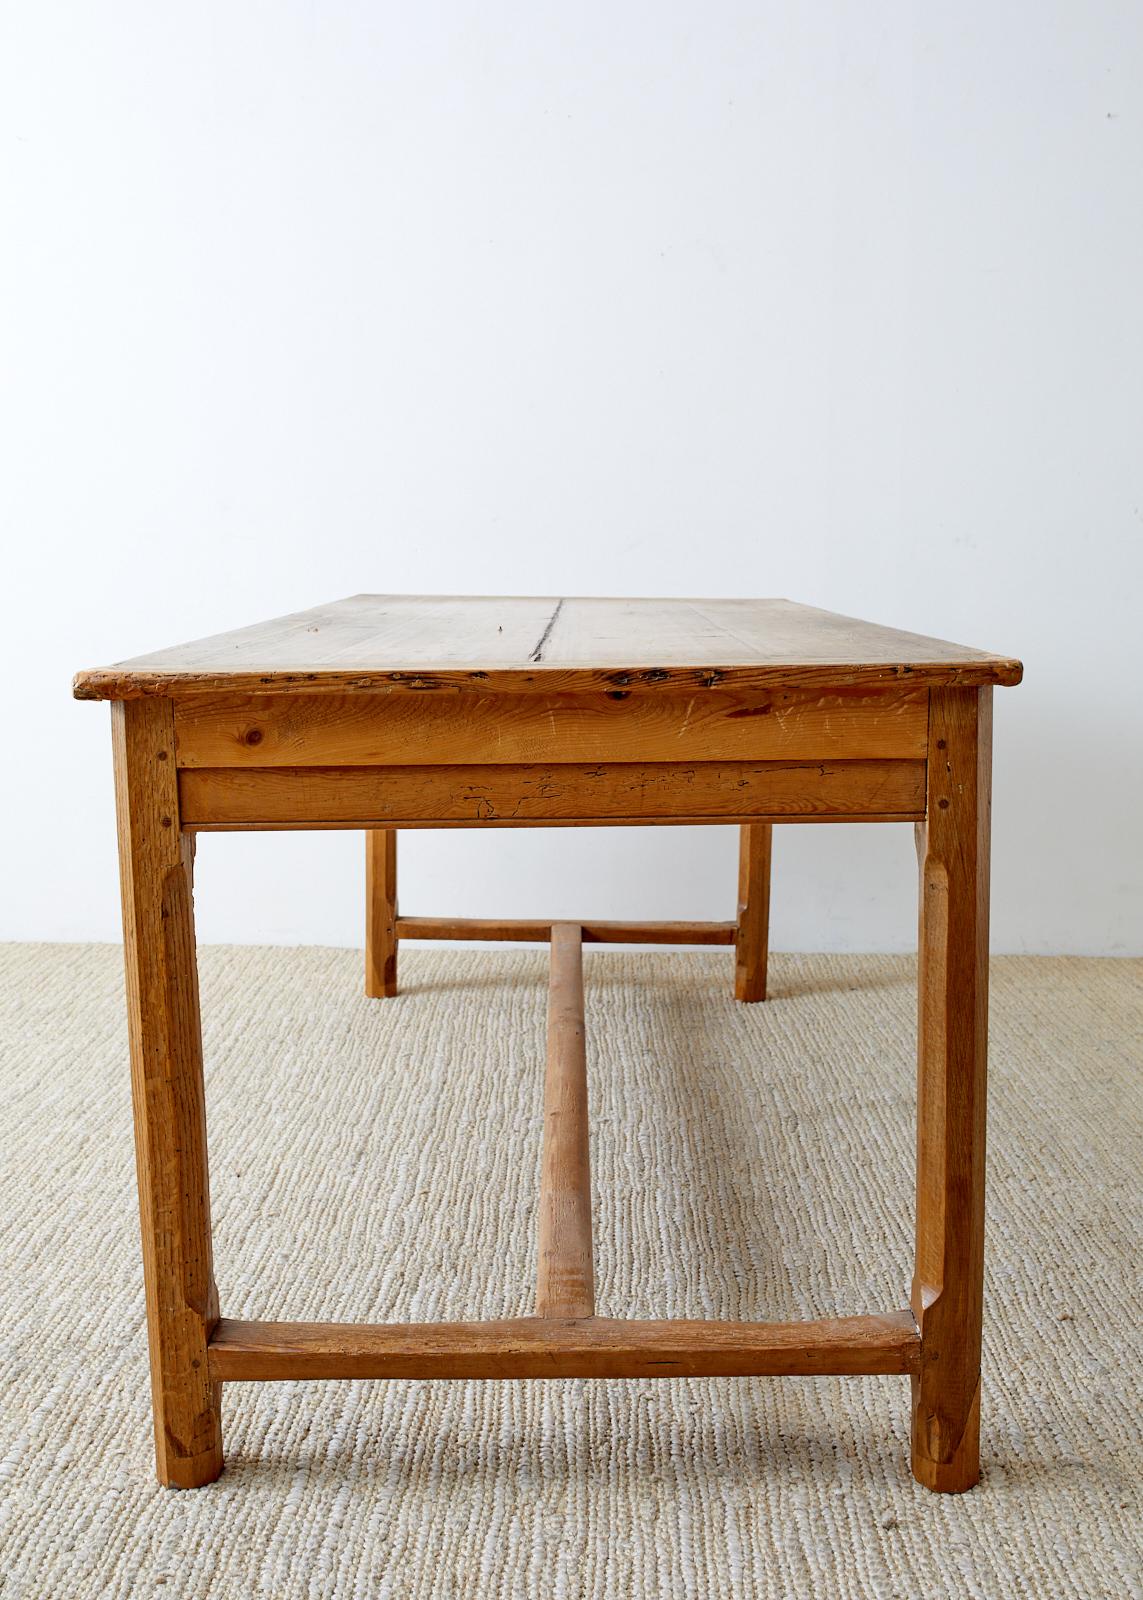 19th Century American Pine Farmhouse Dining or Writing Table 10